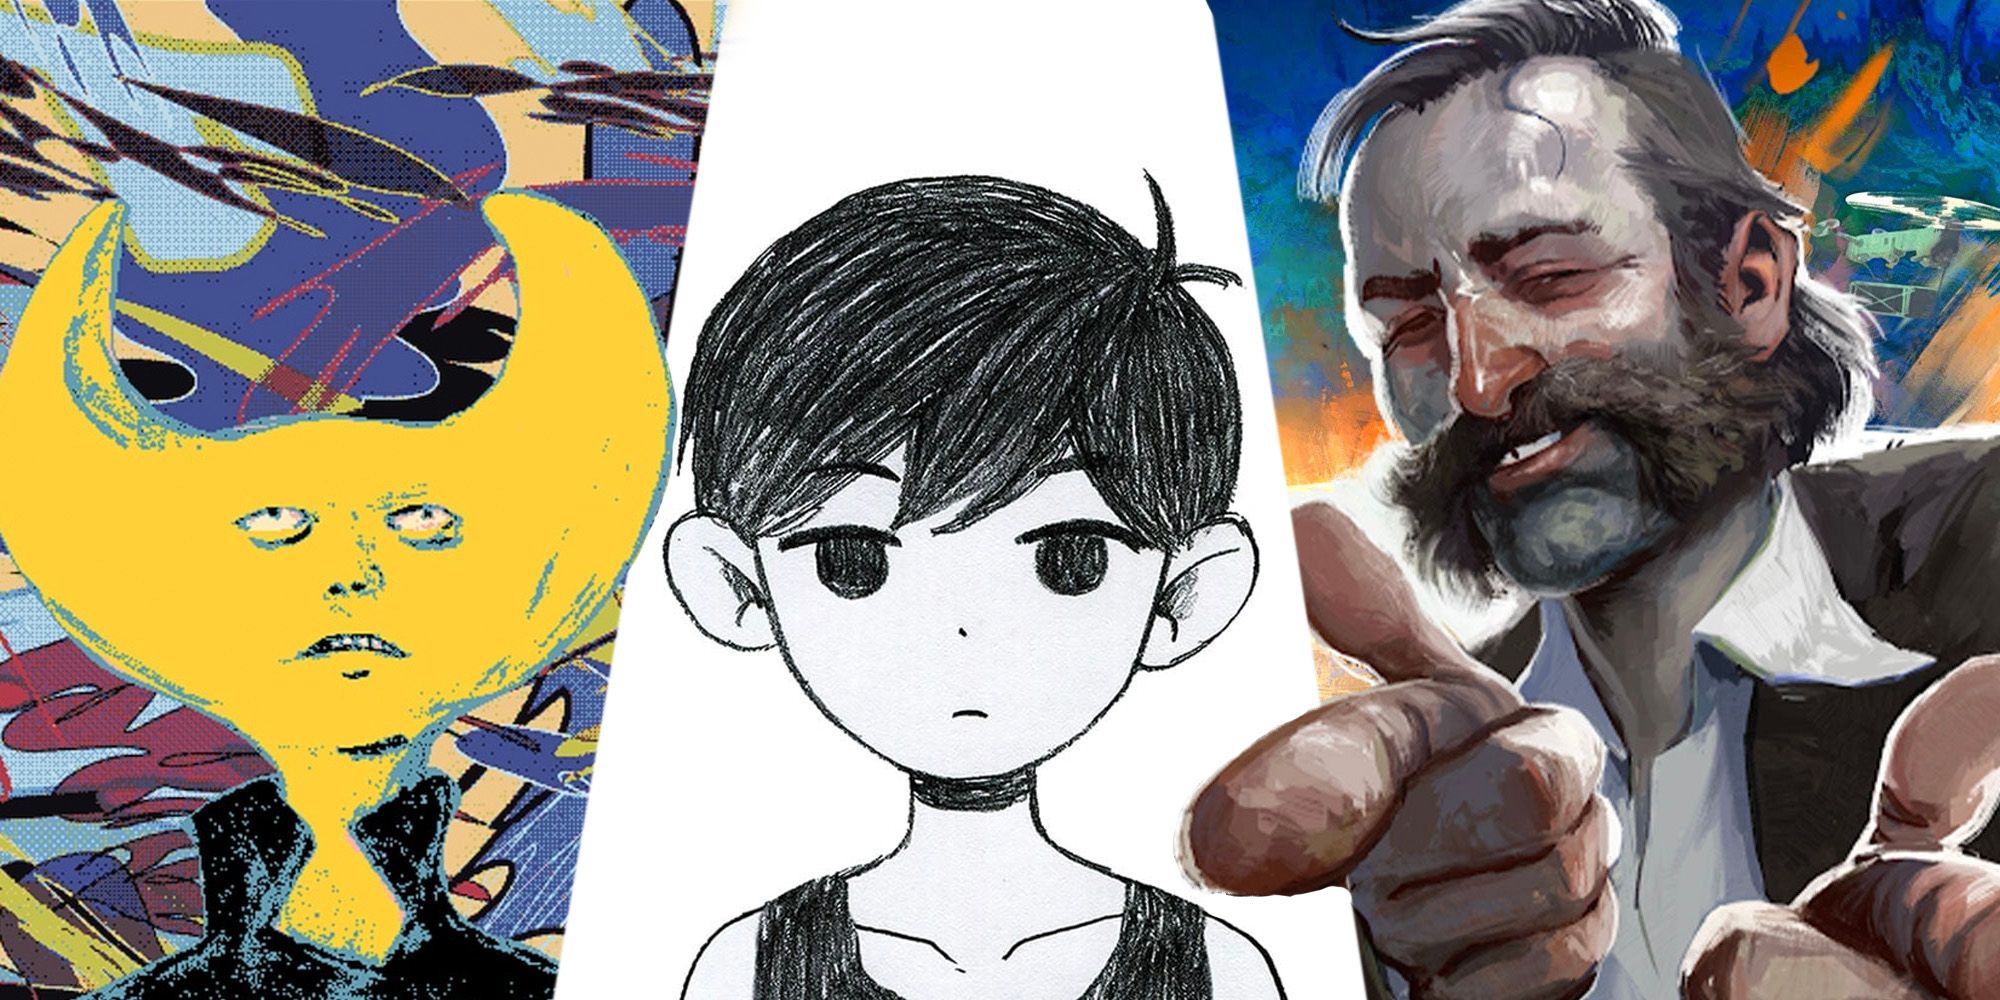 A collage of Wayne, Omori, and Harry from Disco Elysium.